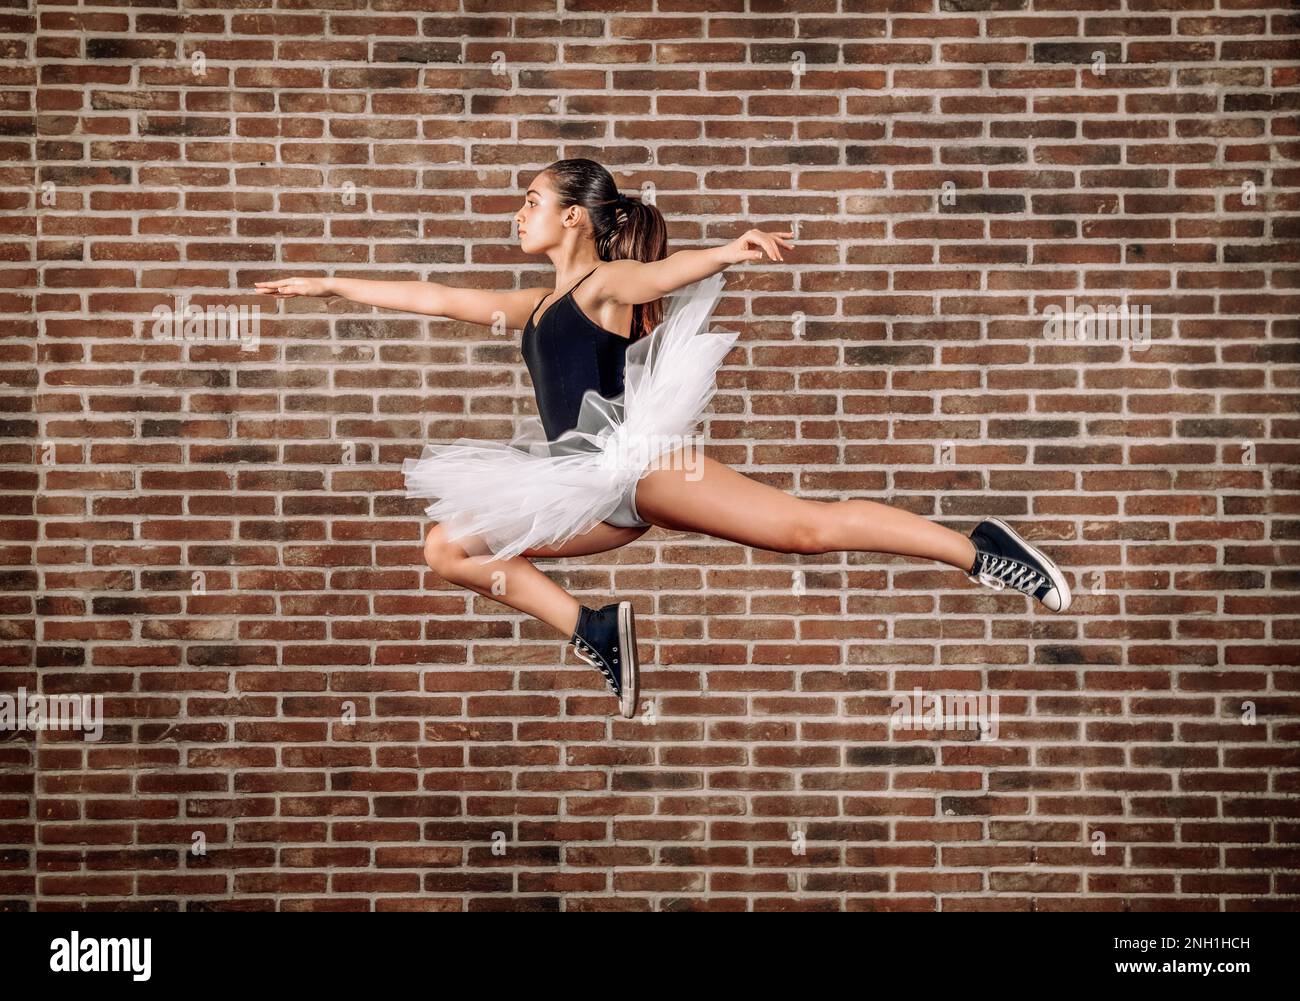 Side view full body of young ballerina in white tutu and black sneakers jumping against brick wall Stock Photo